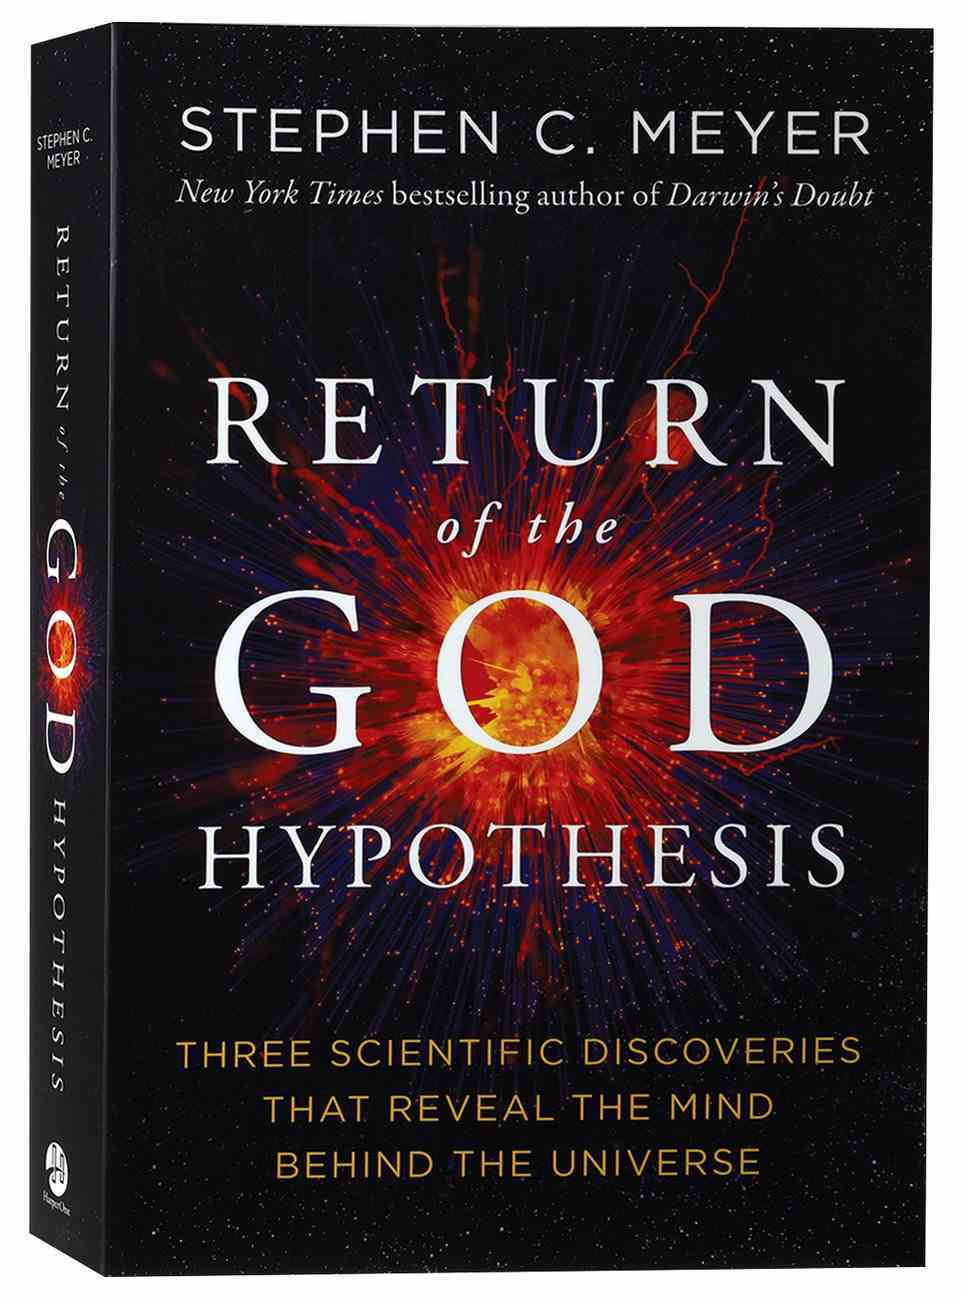 The Return of the God Hypothesis: Three Scientific Discoveries Revealing the Mind Behind the Universe Paperback